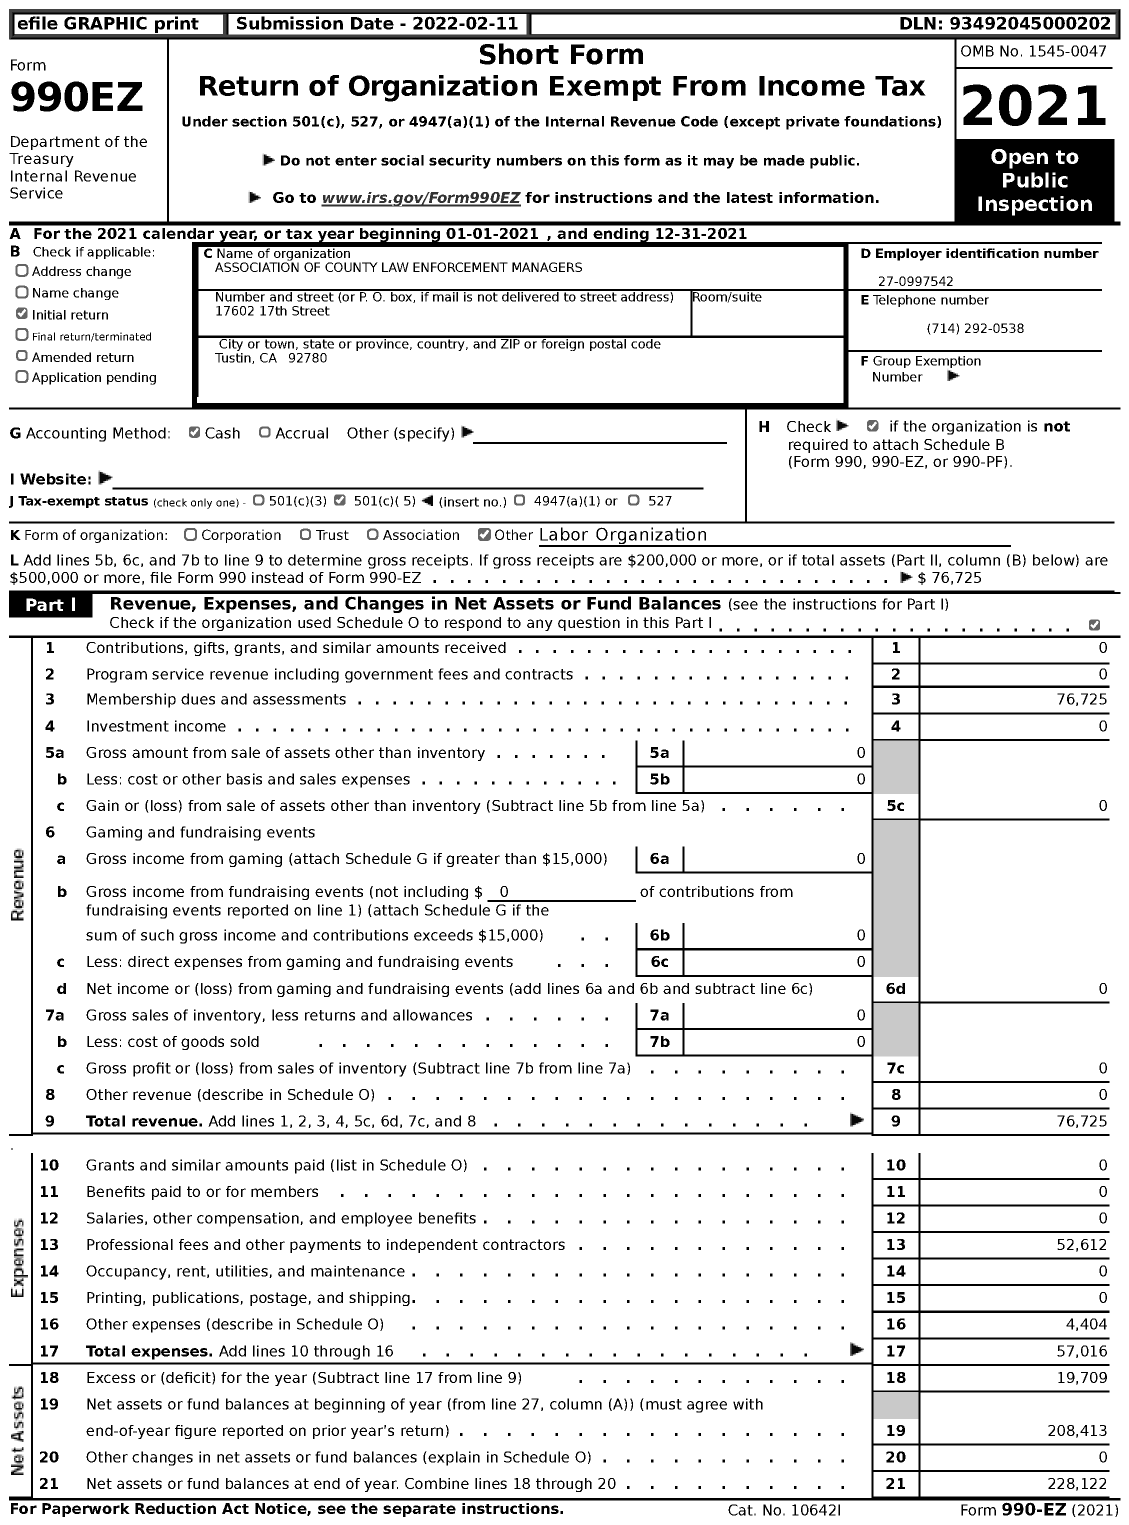 Image of first page of 2021 Form 990EZ for Association of County Law Enforcement Managers